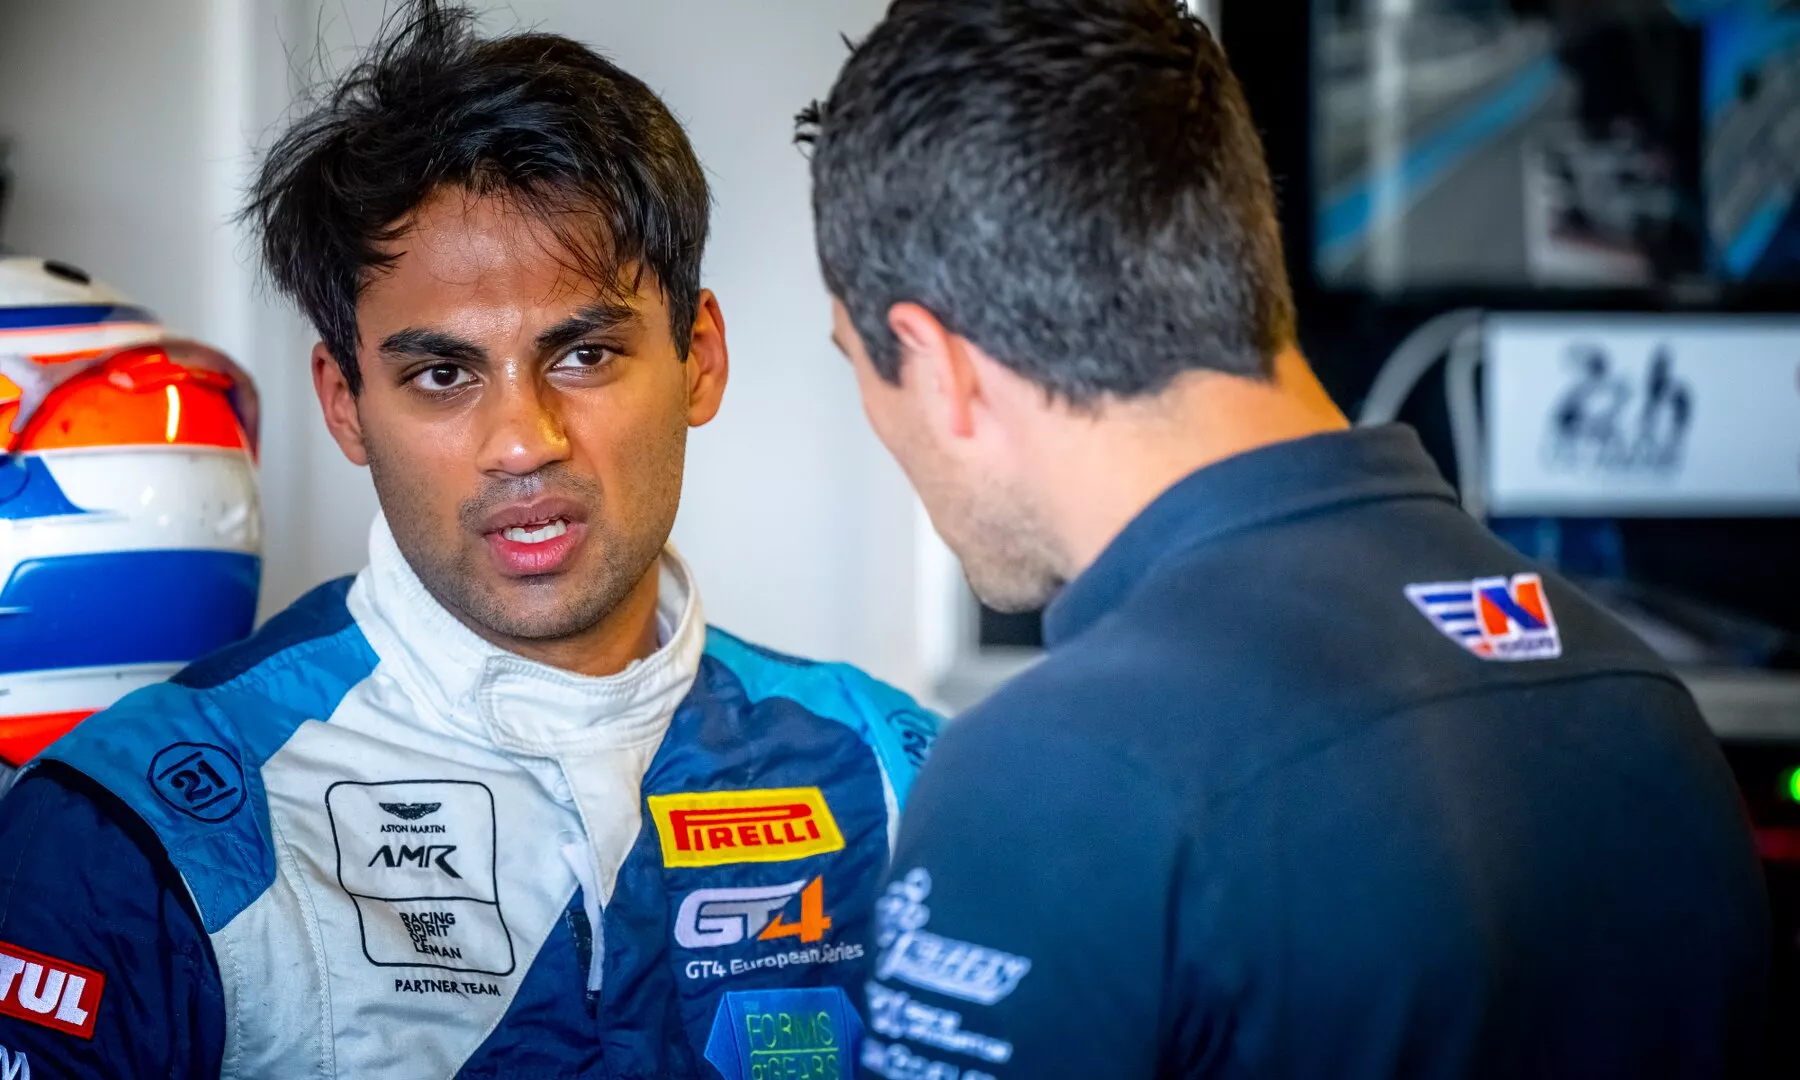 India's Akhil Rabindra manages mid-table finish in round two of European GT4 series